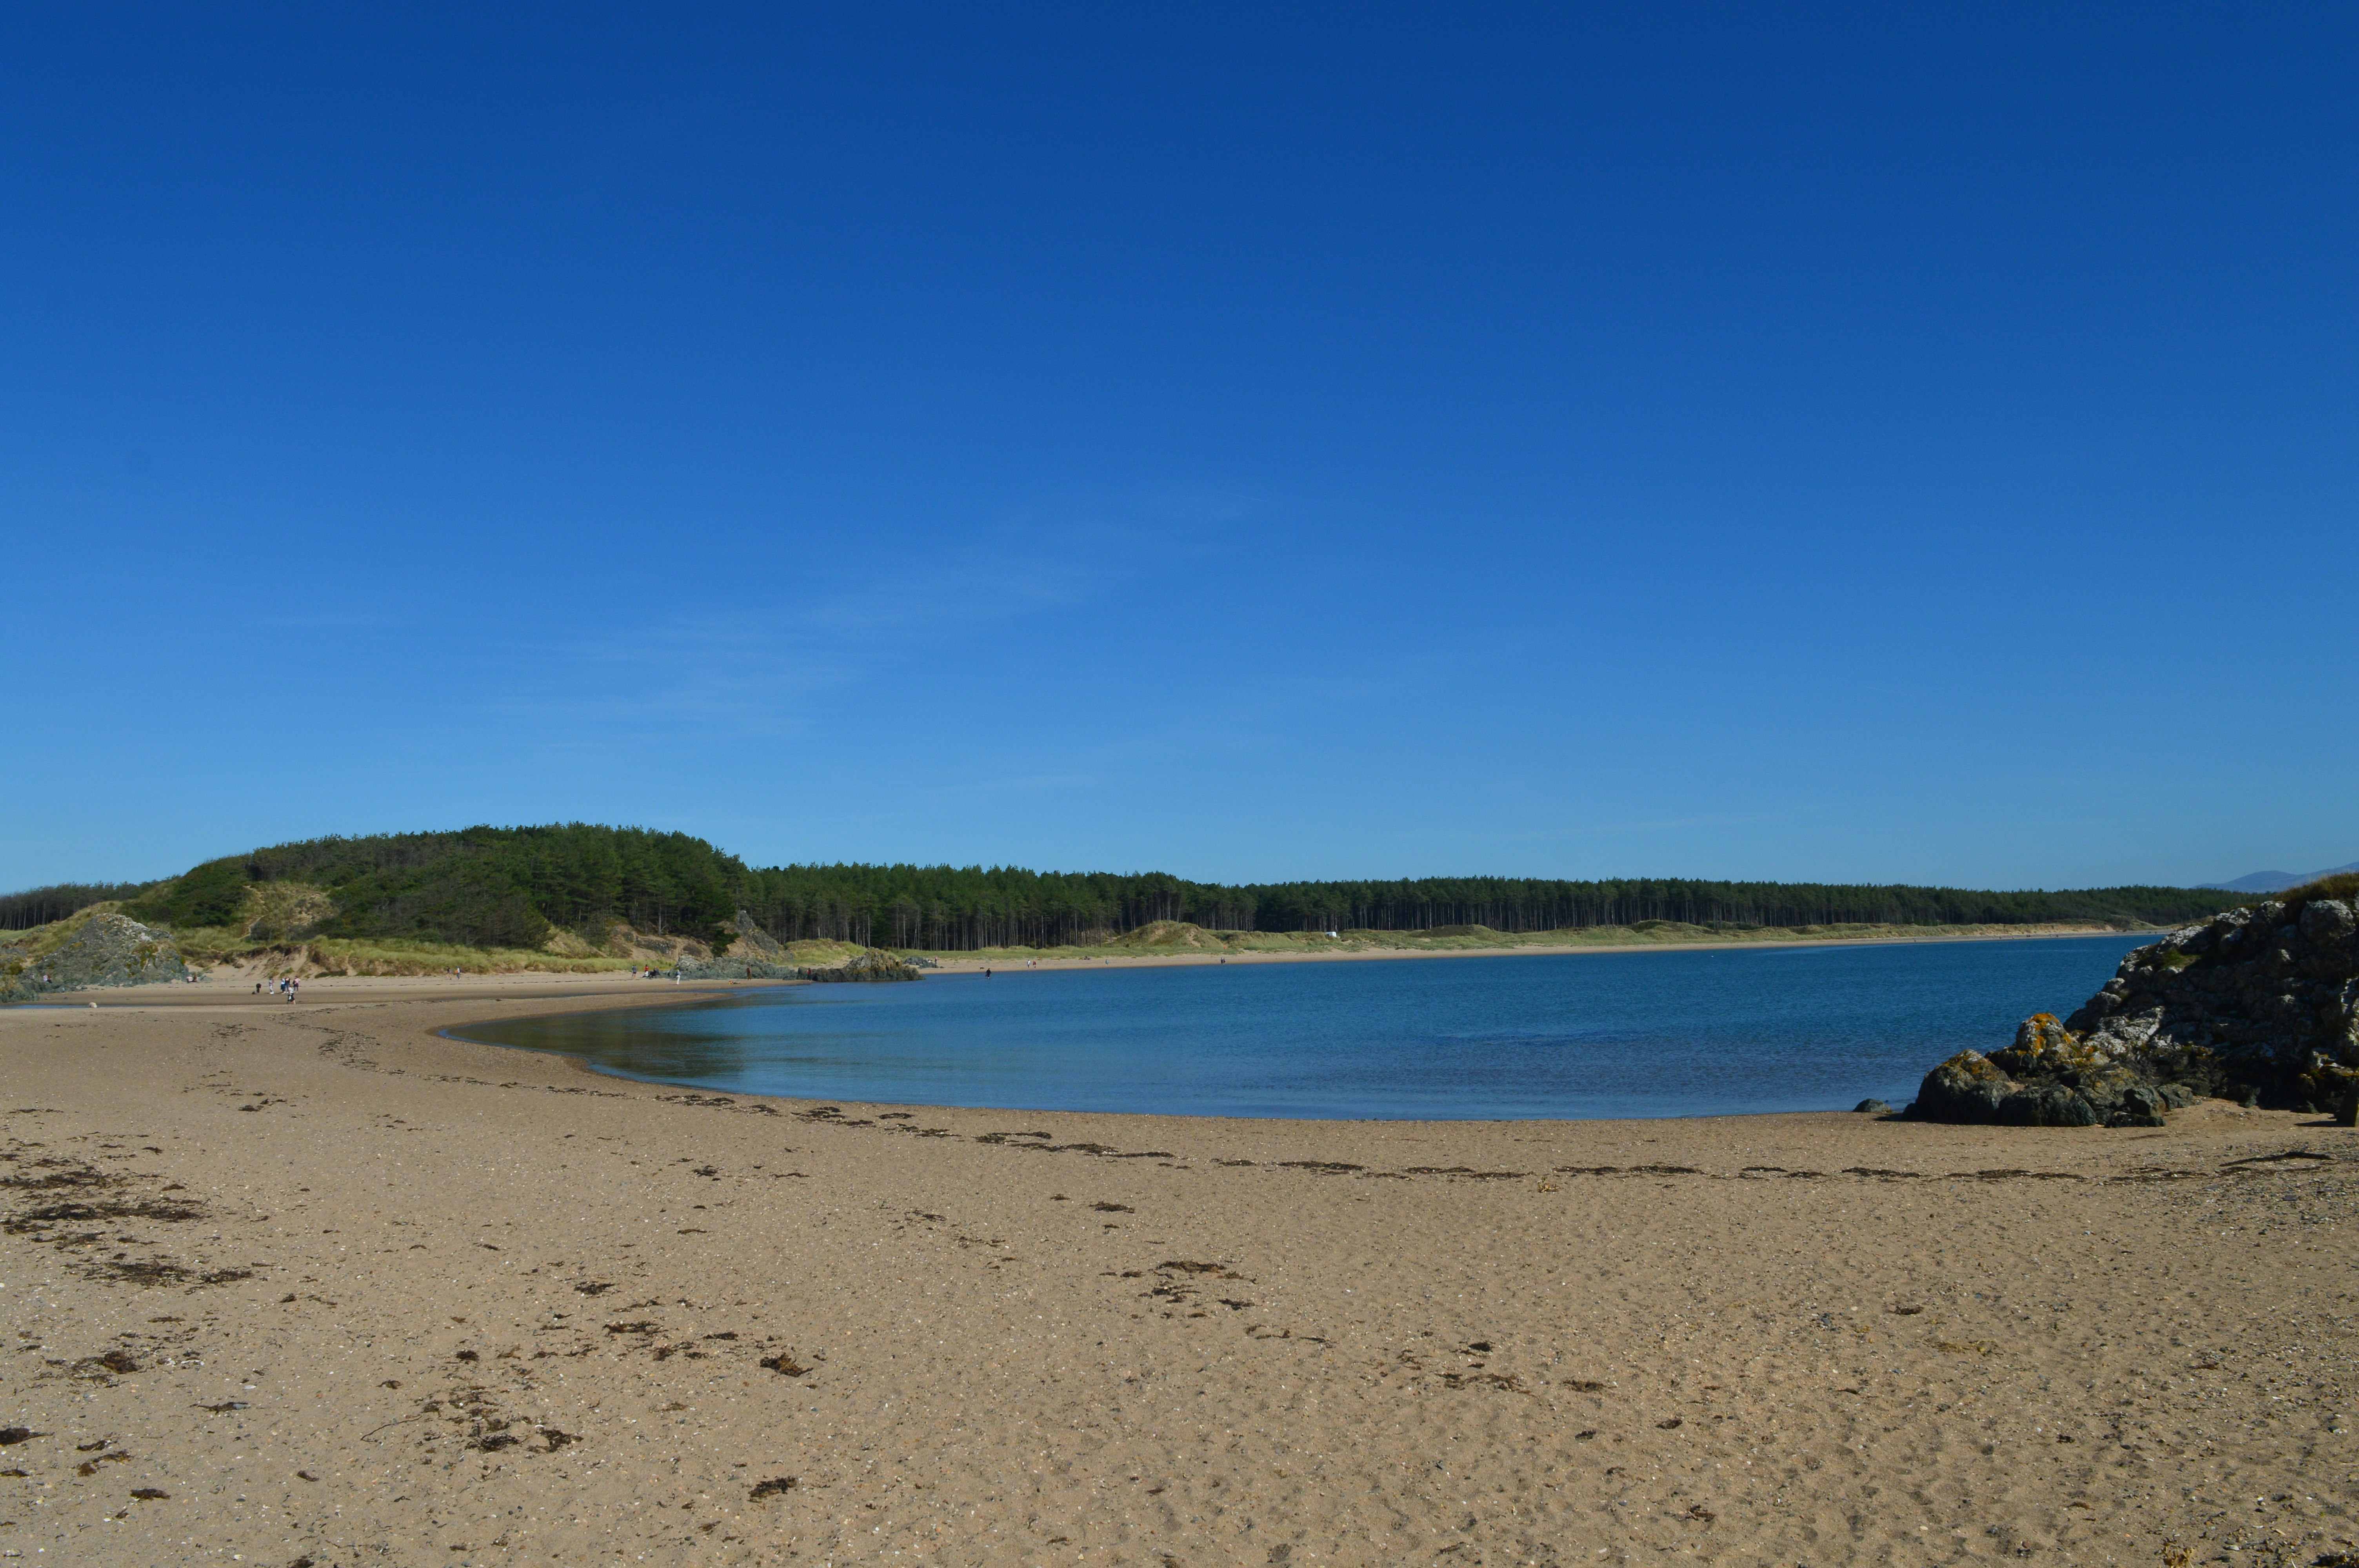 A view of Newborough Beach with a forest in the background.